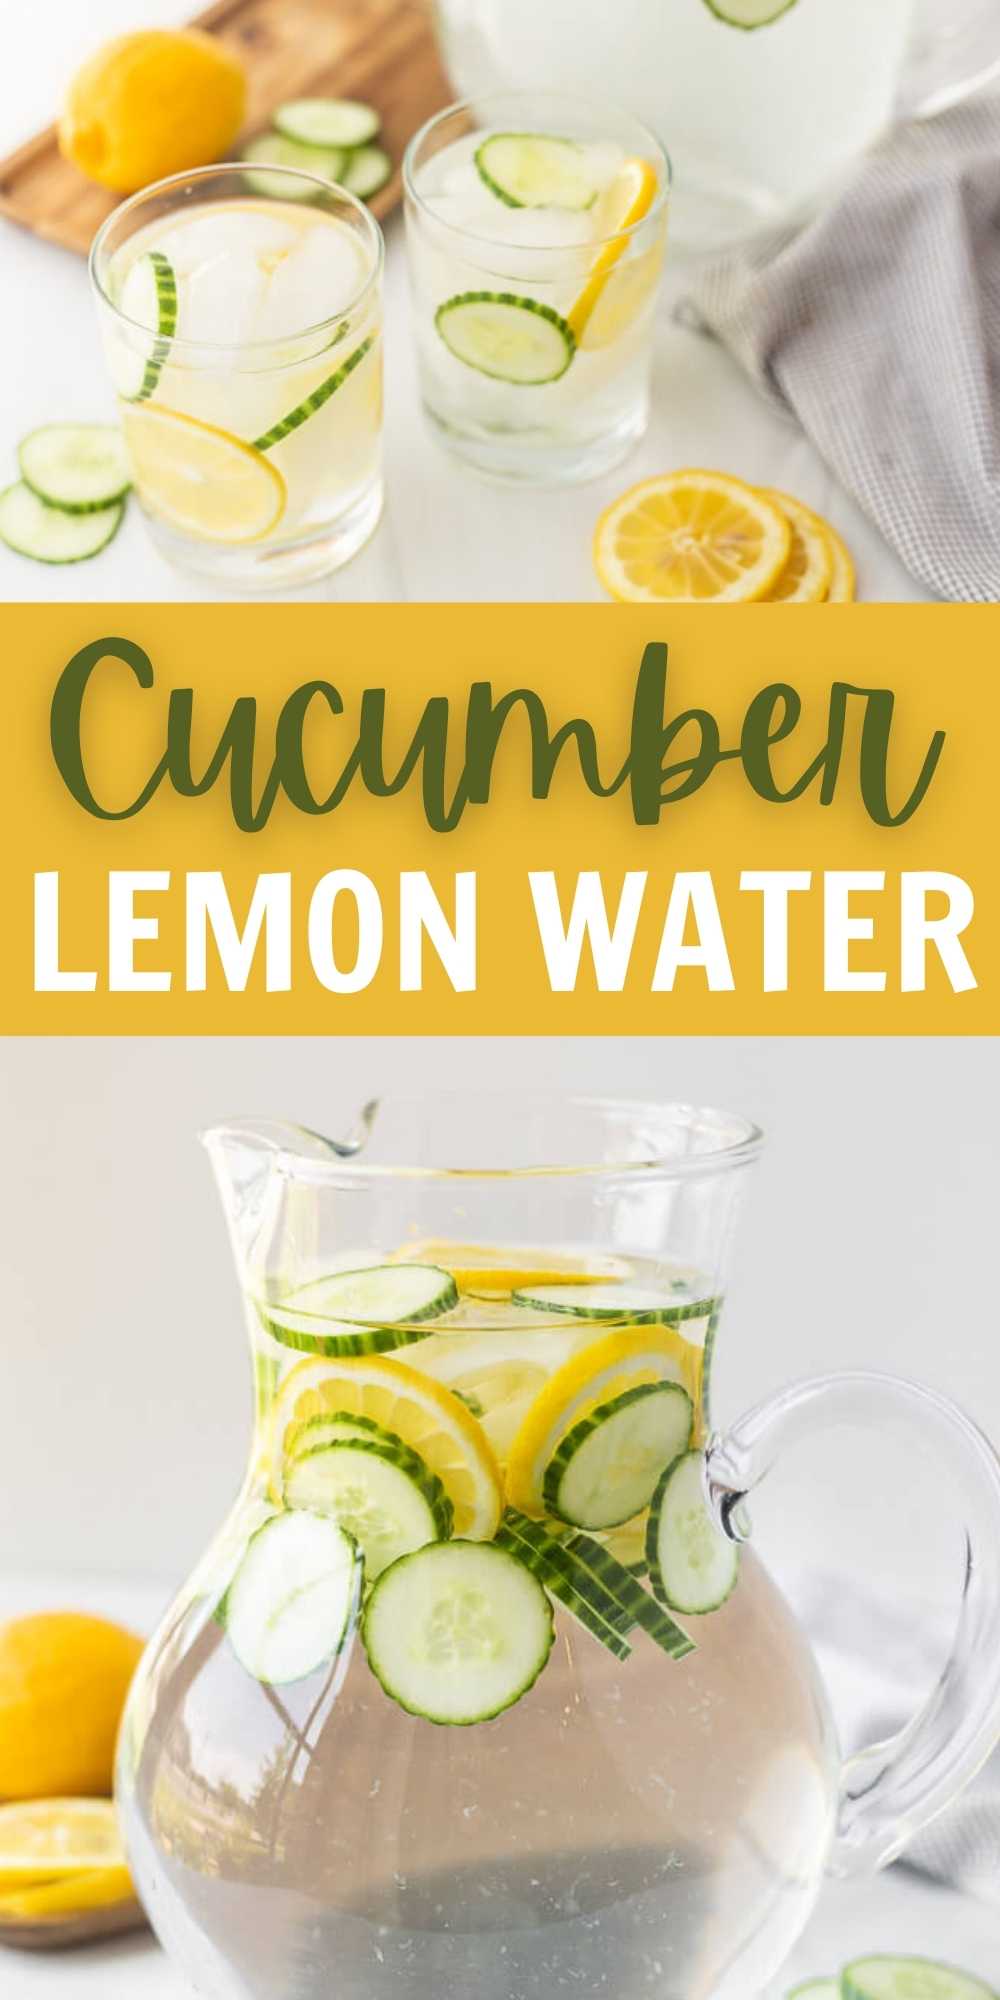 Learn how to make this super easy Cucumber Lemon Water recipe with just 3 ingredients. This refreshing drink is easy to make and perfect for the Spring and Summertime.  Plus there are a ton of healthy benefits too! #eatingonadime #drinkrecipes #waterrecipes #cucumberrecipes #lemonrecipes 
